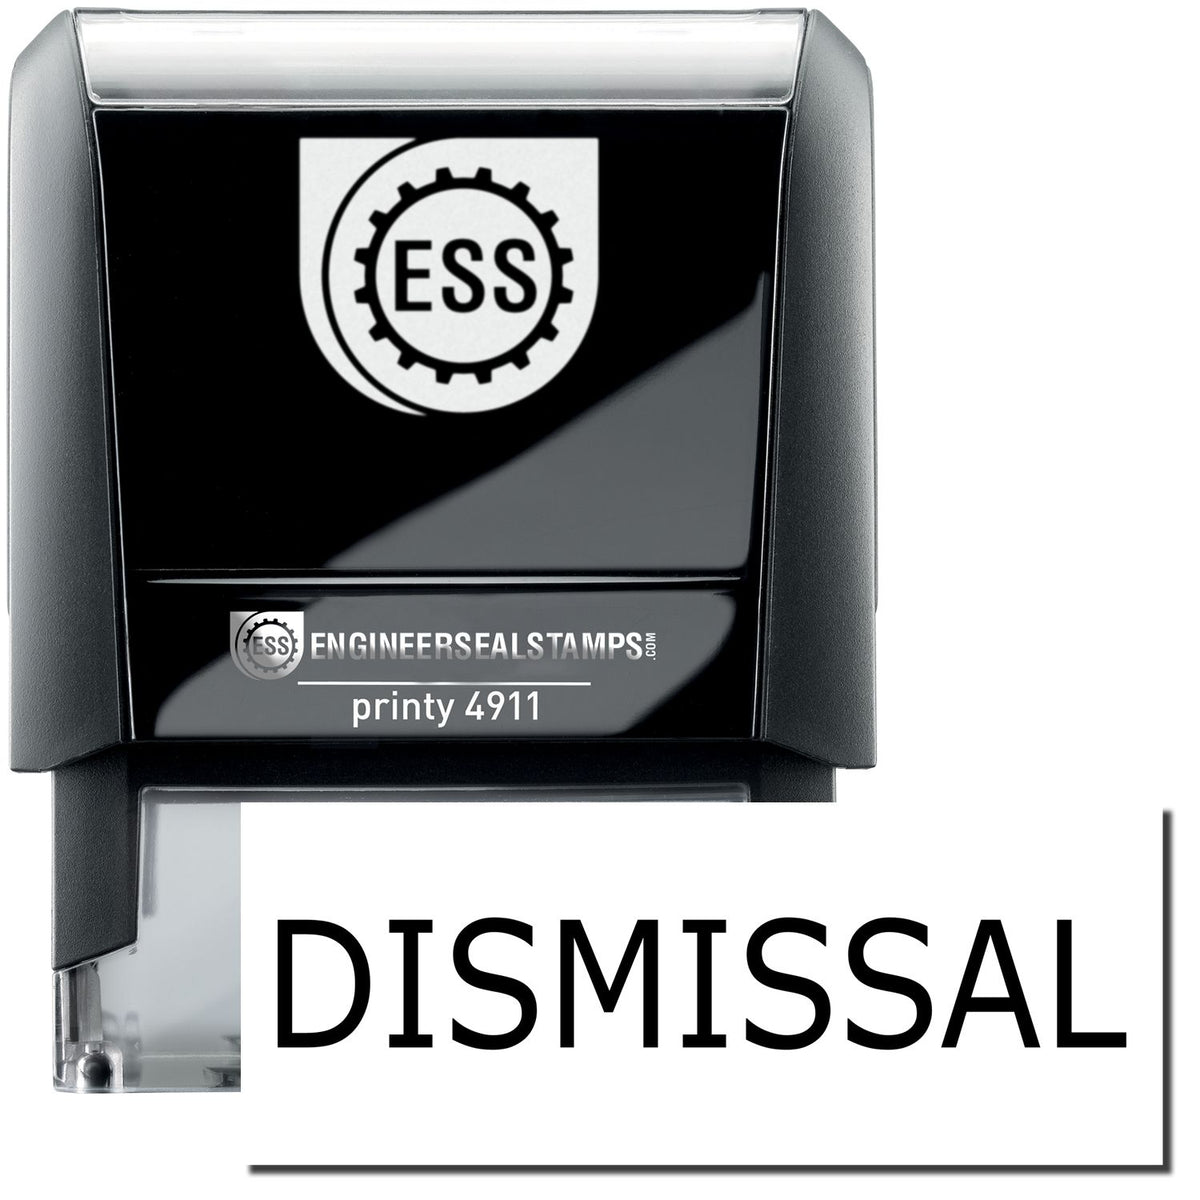 A self-inking stamp with a stamped image showing how the text &quot;DISMISSAL&quot; is displayed after stamping.